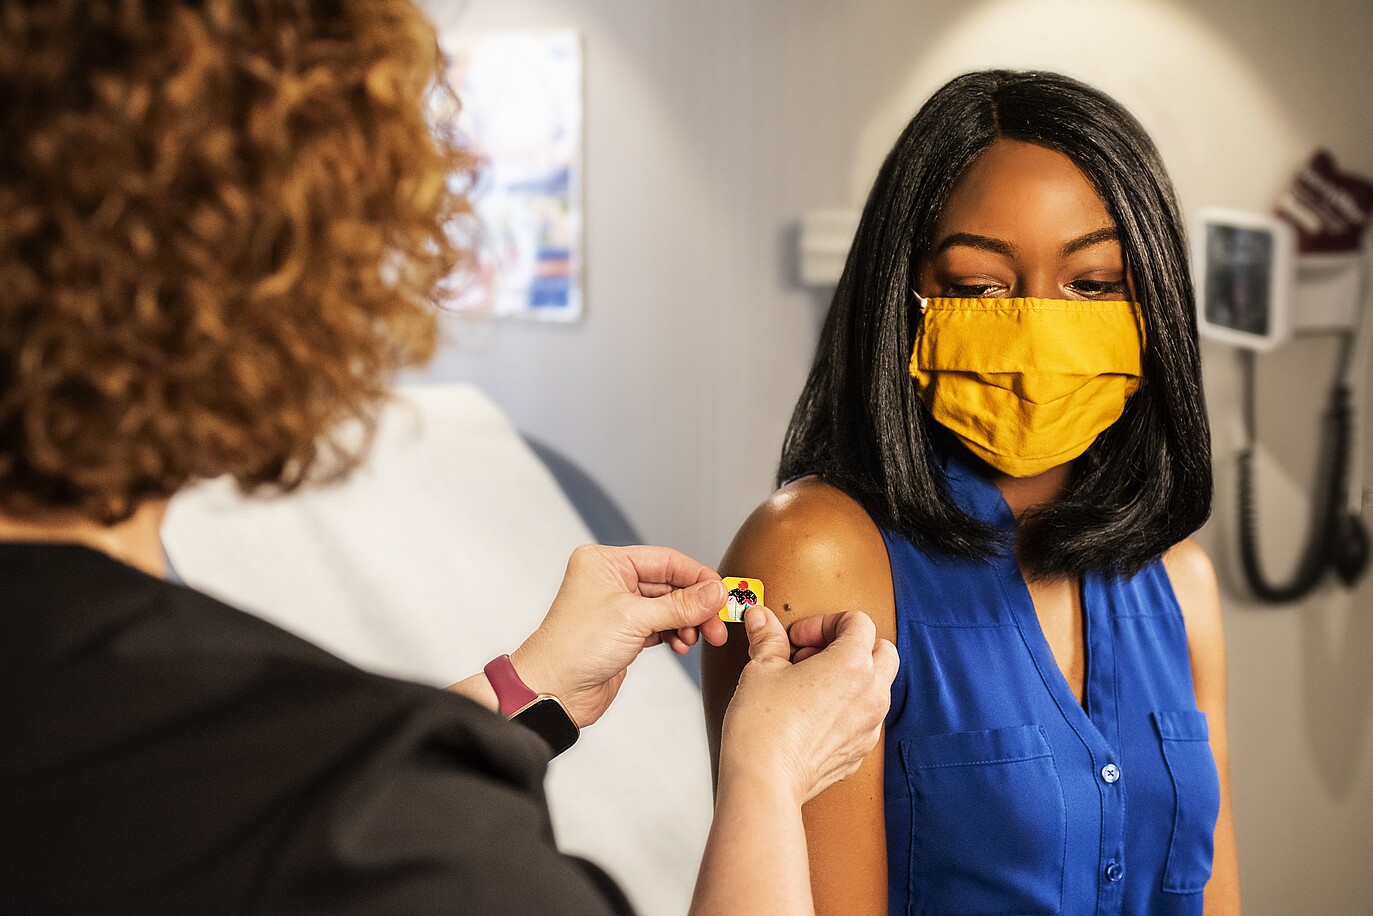 An image shows a woman in the mask being vaccinated 